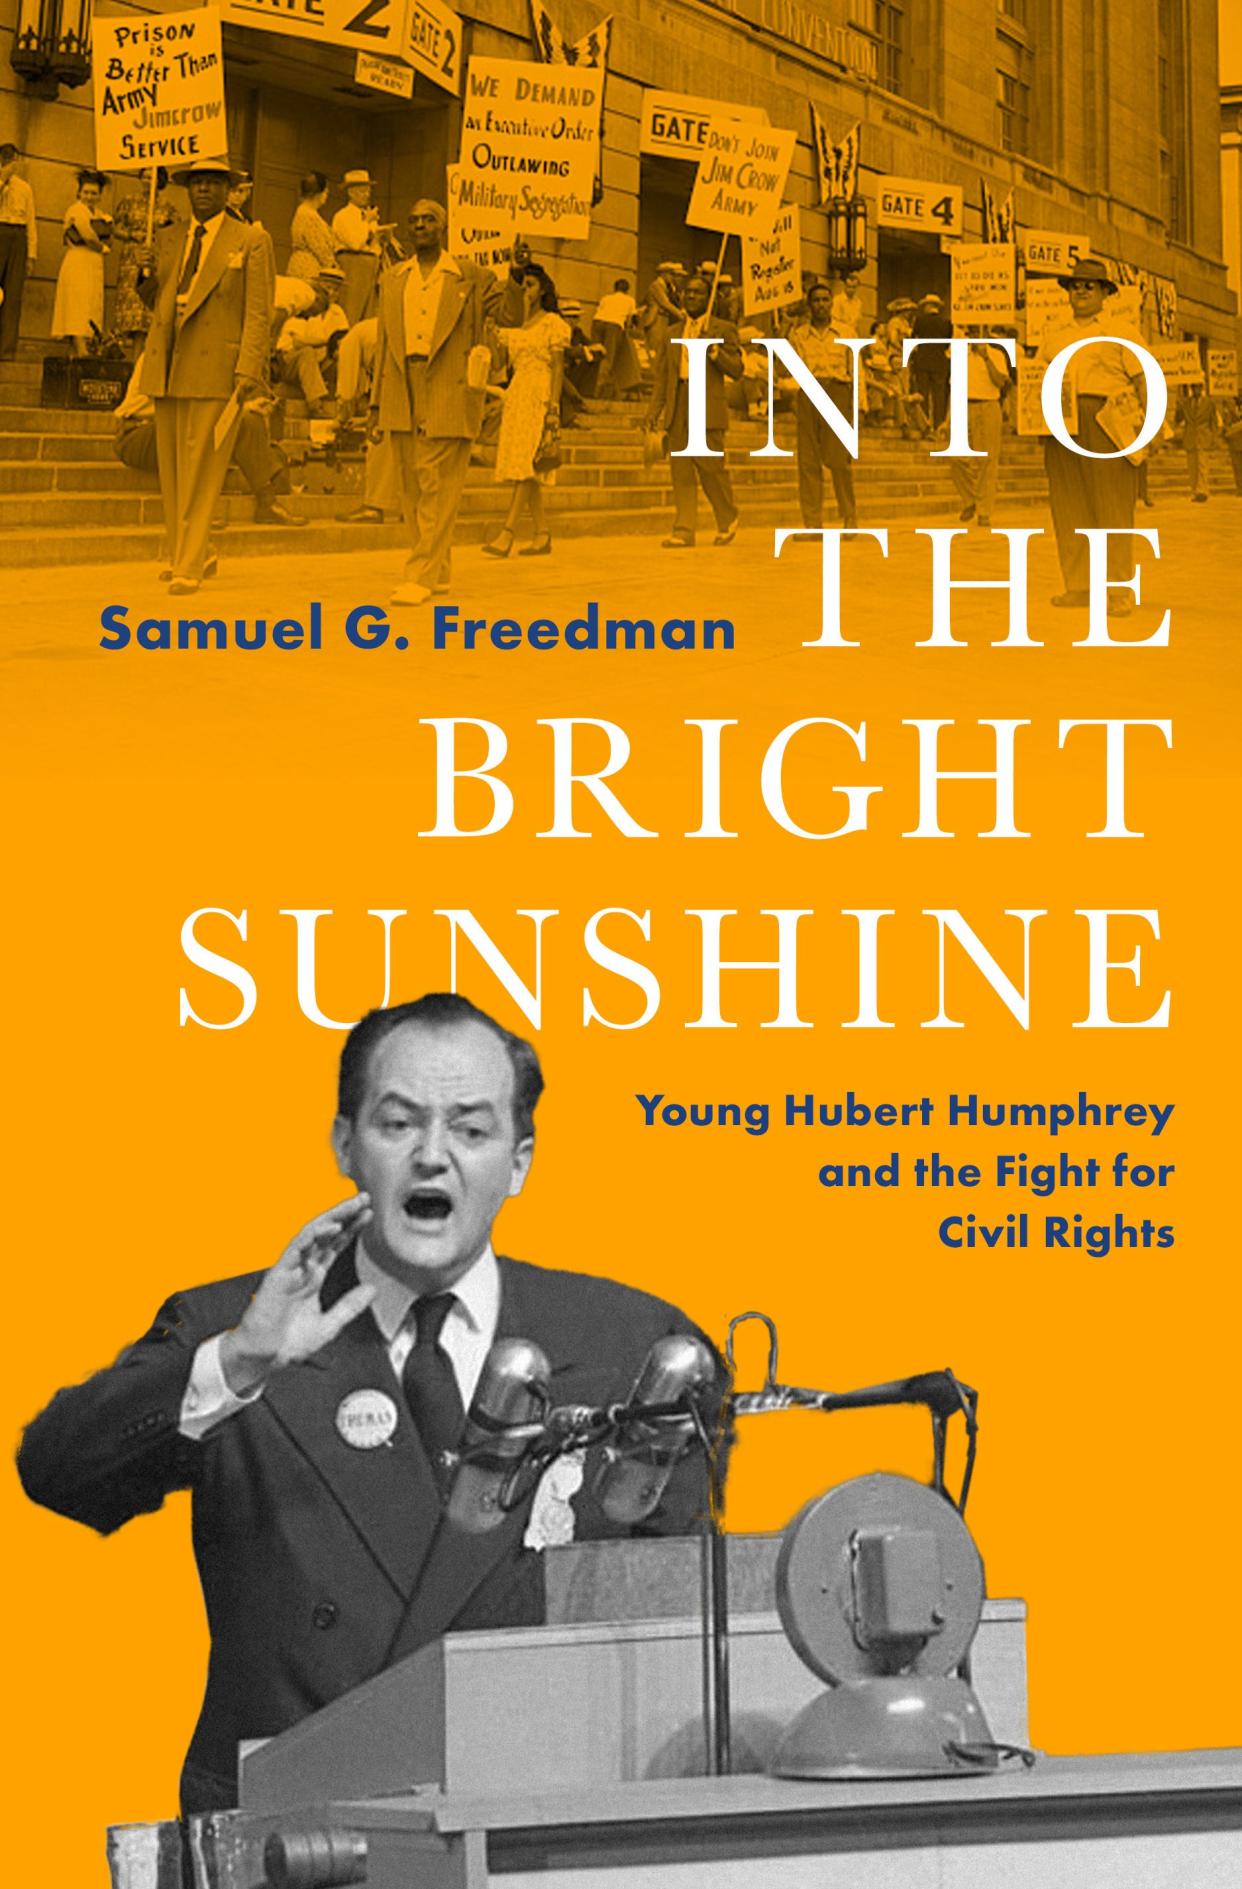 Samuel G. Freedman's book "Into the Bright Sunshine: Young Hubert Humphrey and the Fight for Civil Rights" focuses on Humphrey's early years in public service.